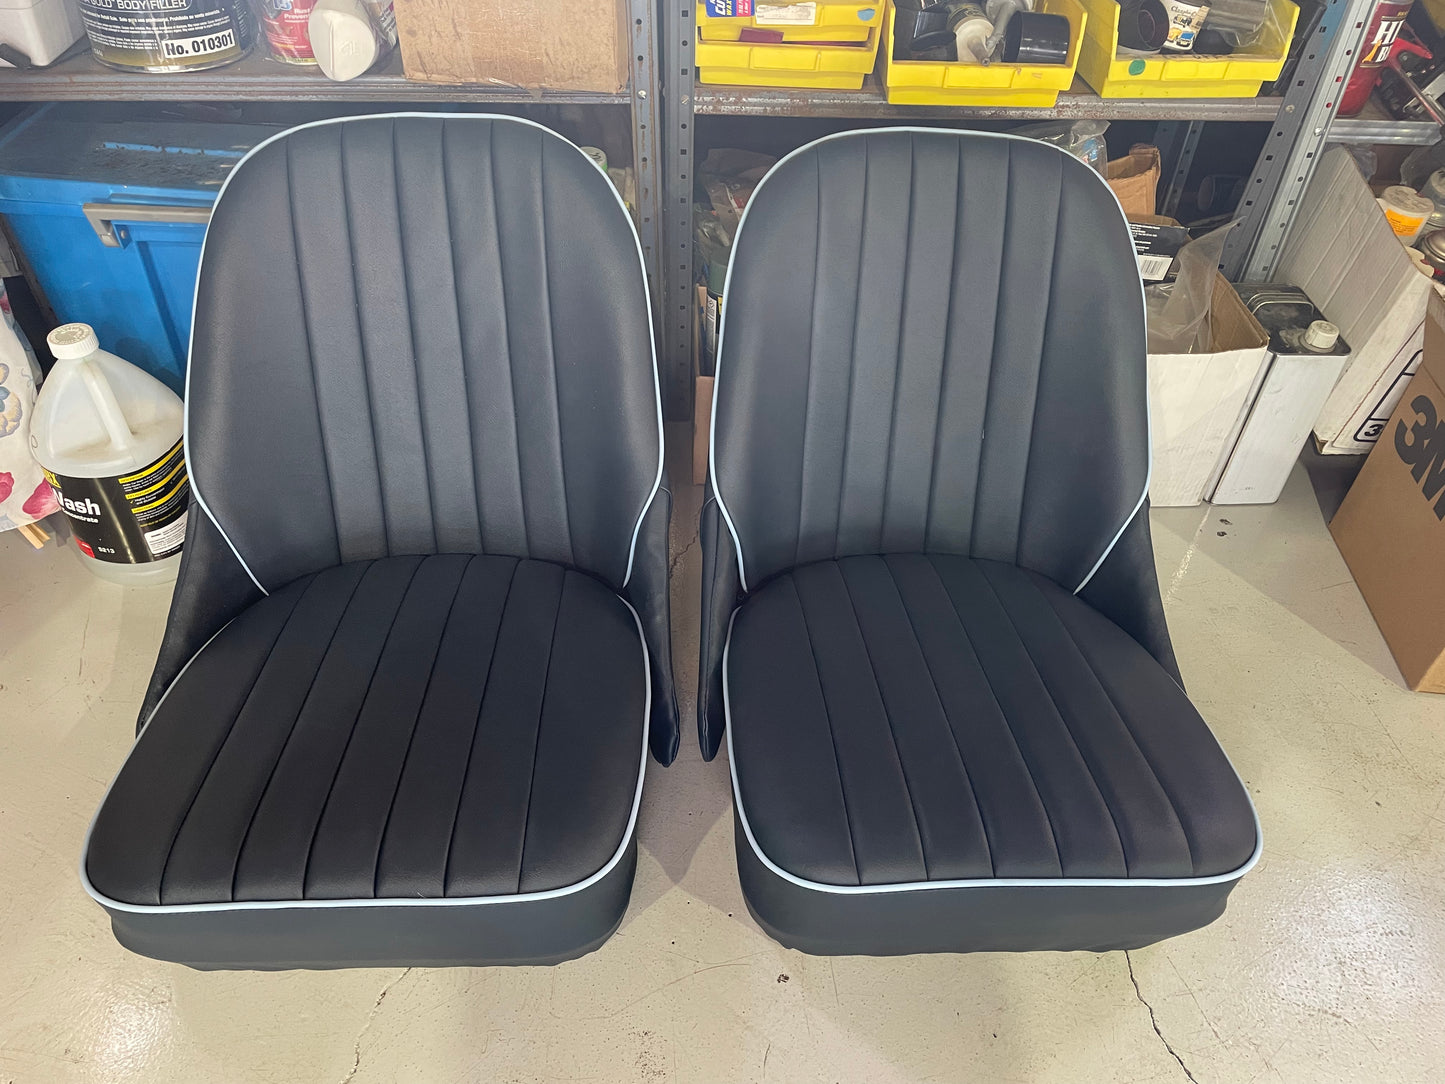 Complete Upholstered Bugeye Seats with all new parts